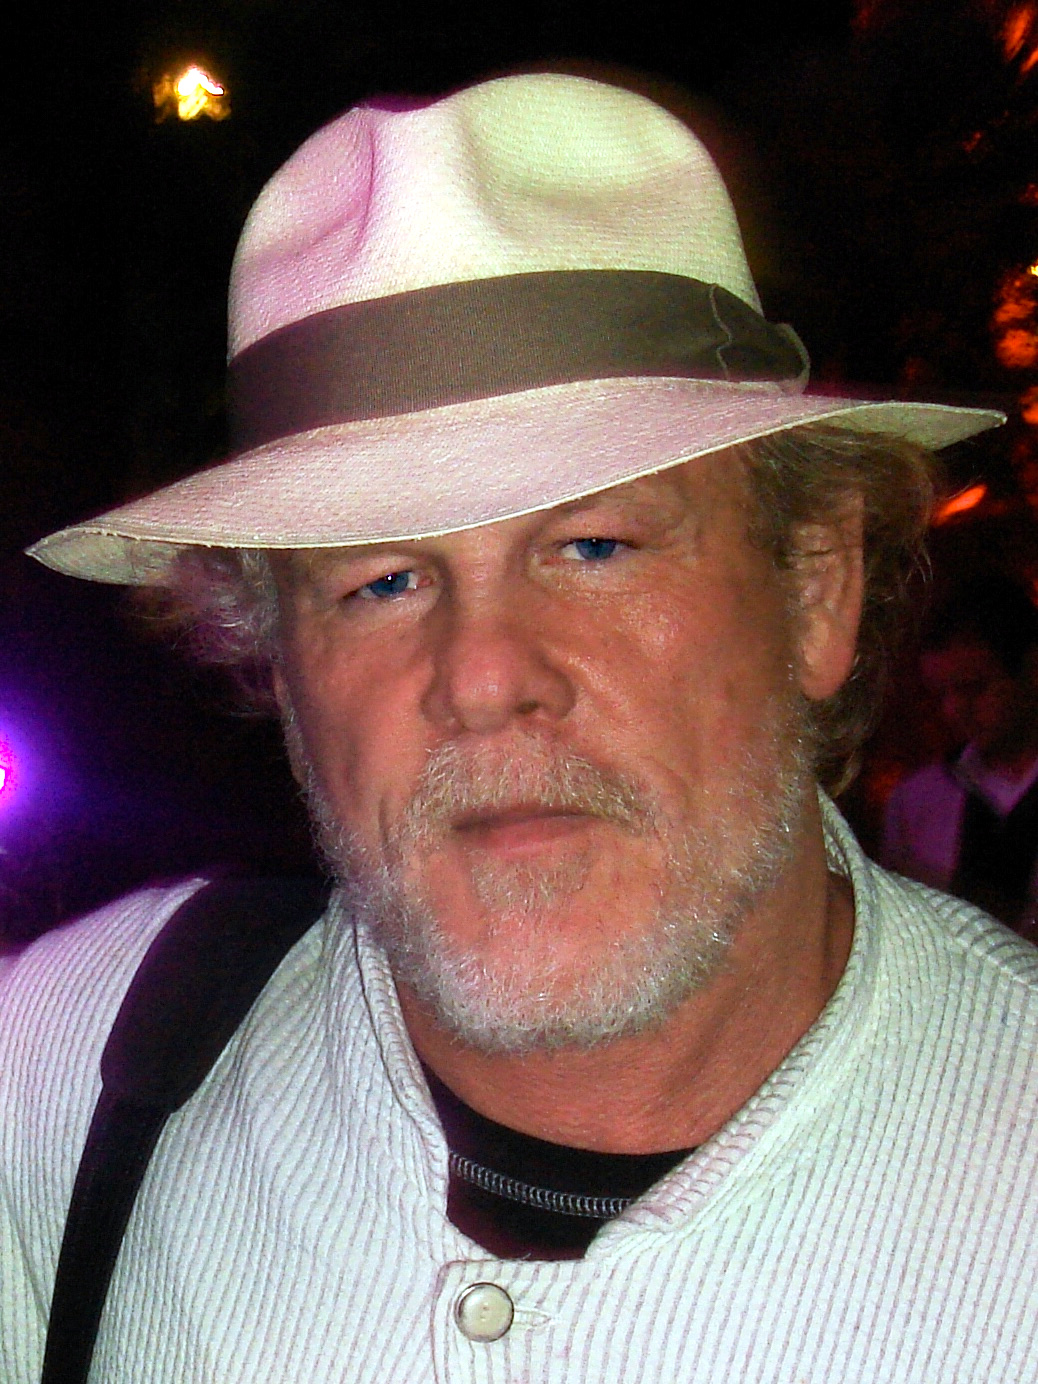 Nick Nolte Illness: What Happened To Him? Where Is The Actor? Illness And Health Update